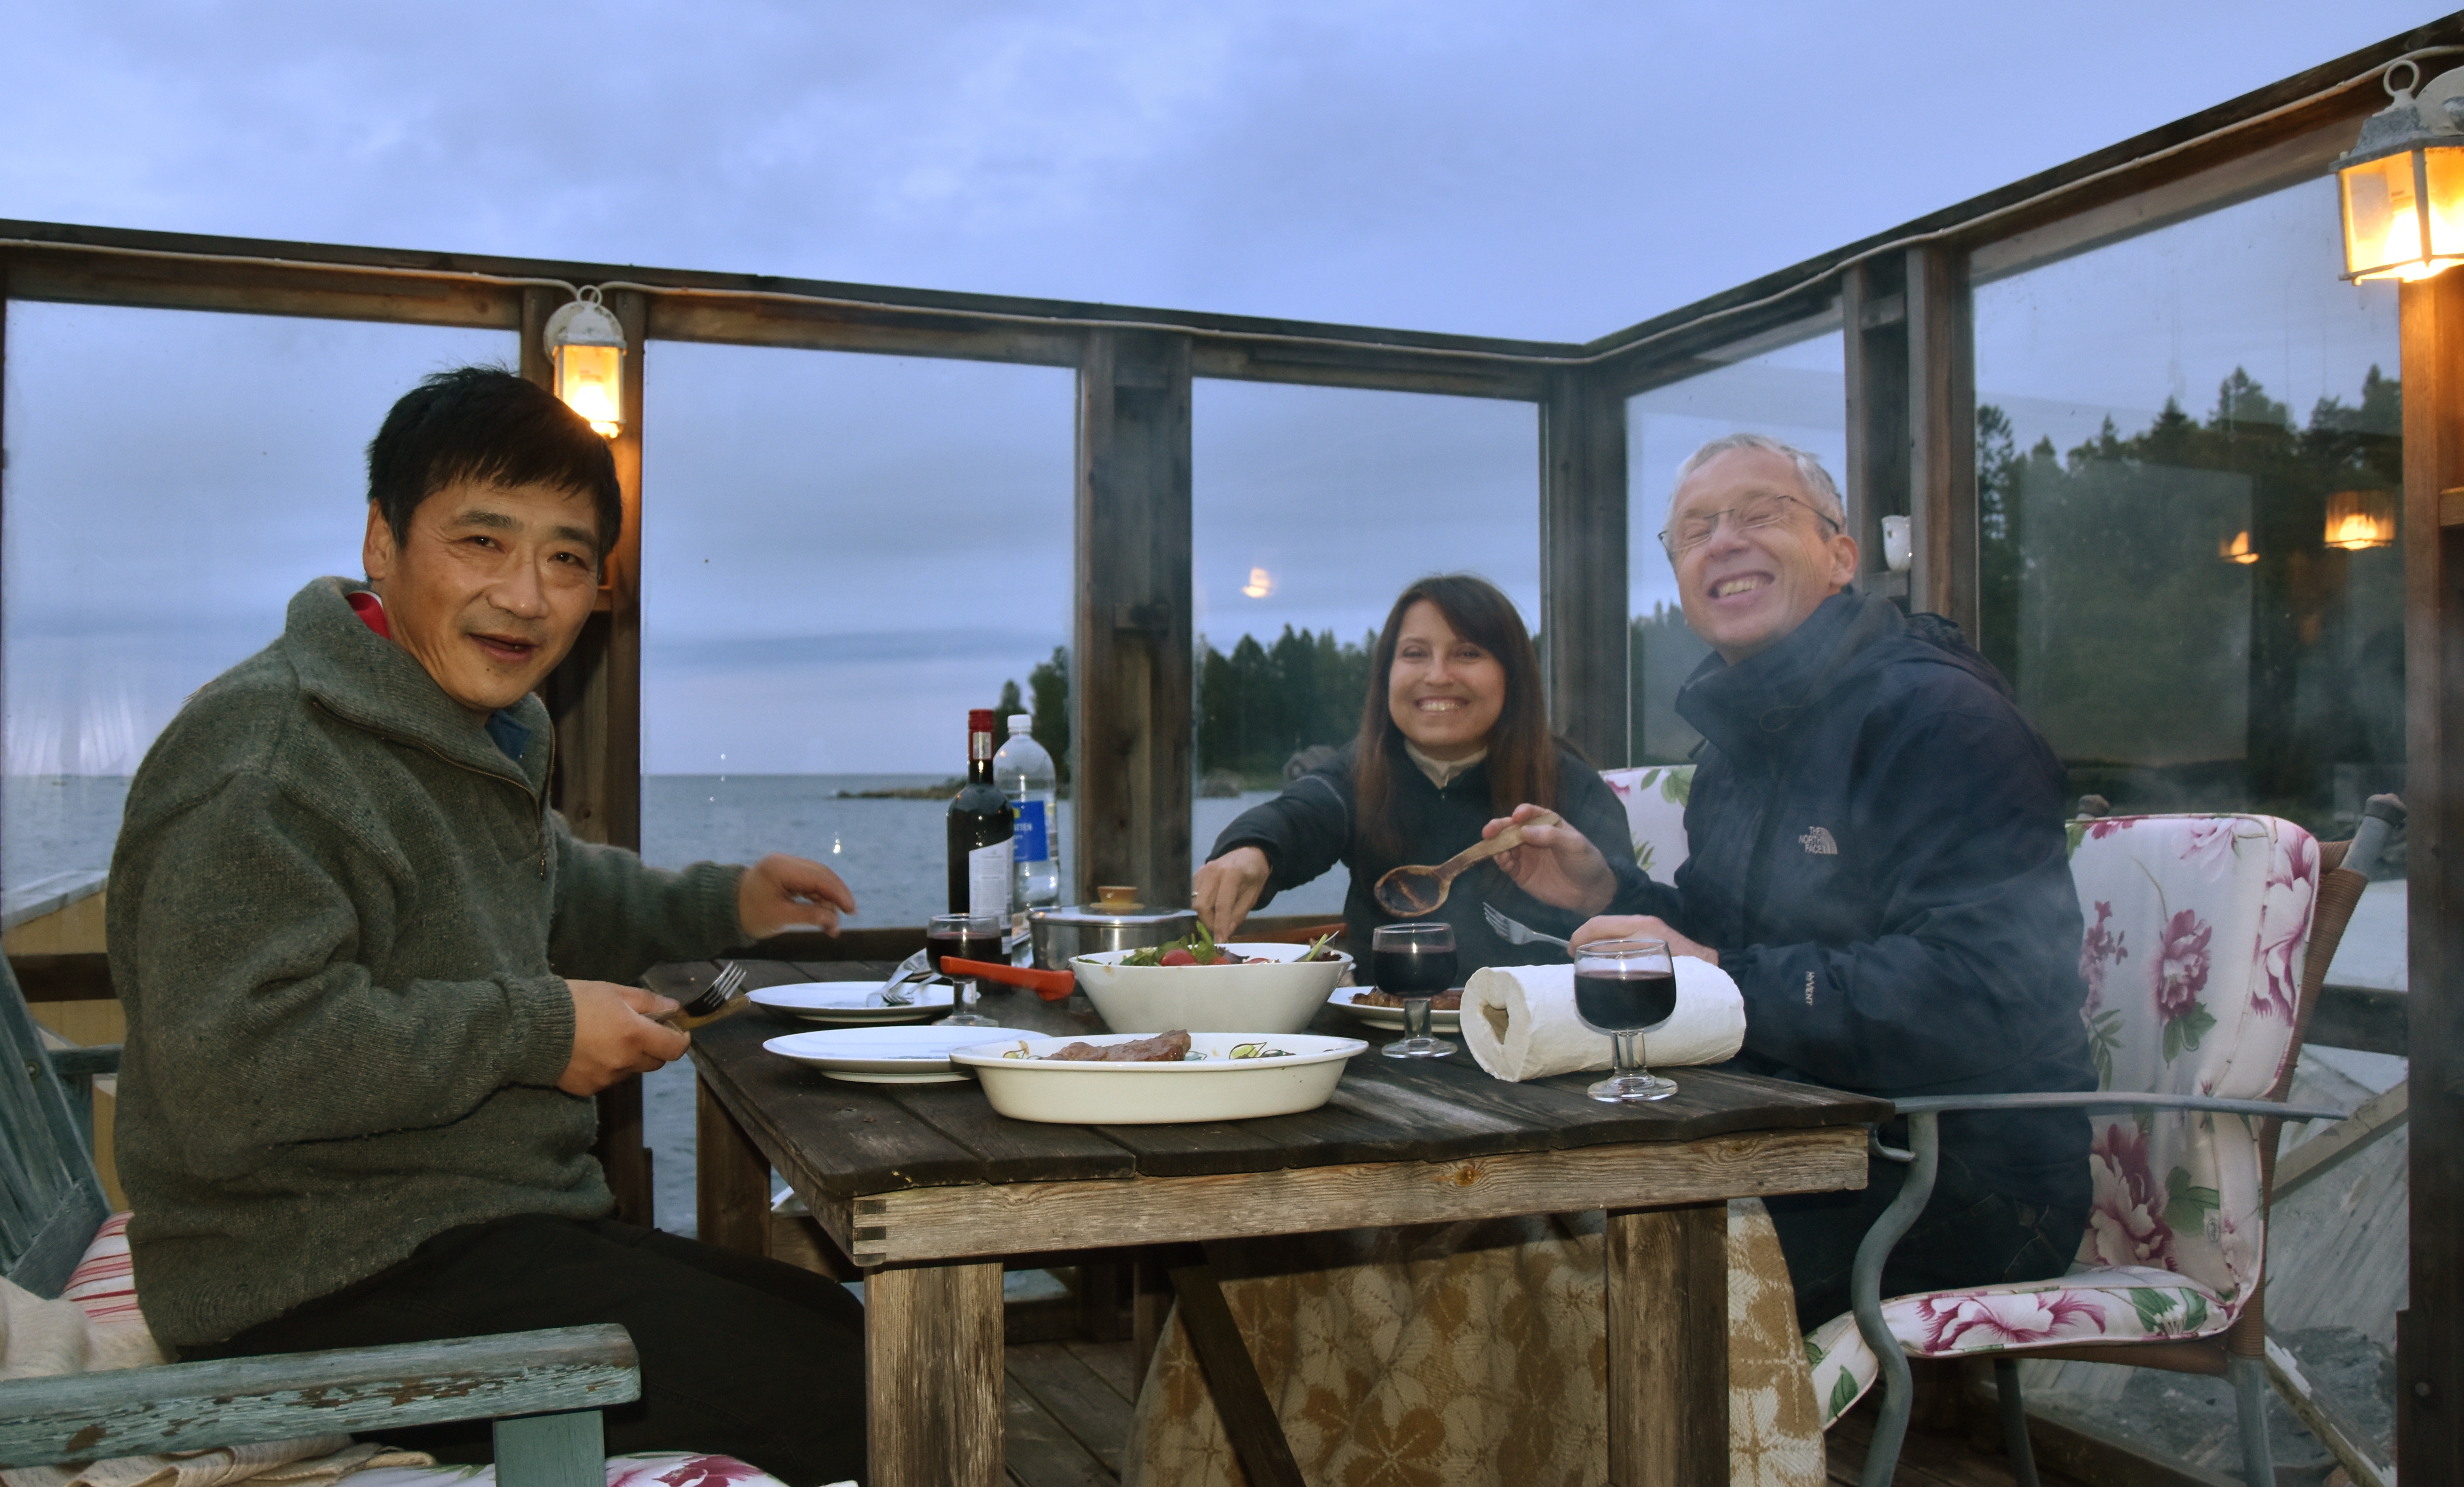 DSC_1890-after-workshop-grill-evening.jpg - Yet a day later, grill evening at Wang's summerhouse